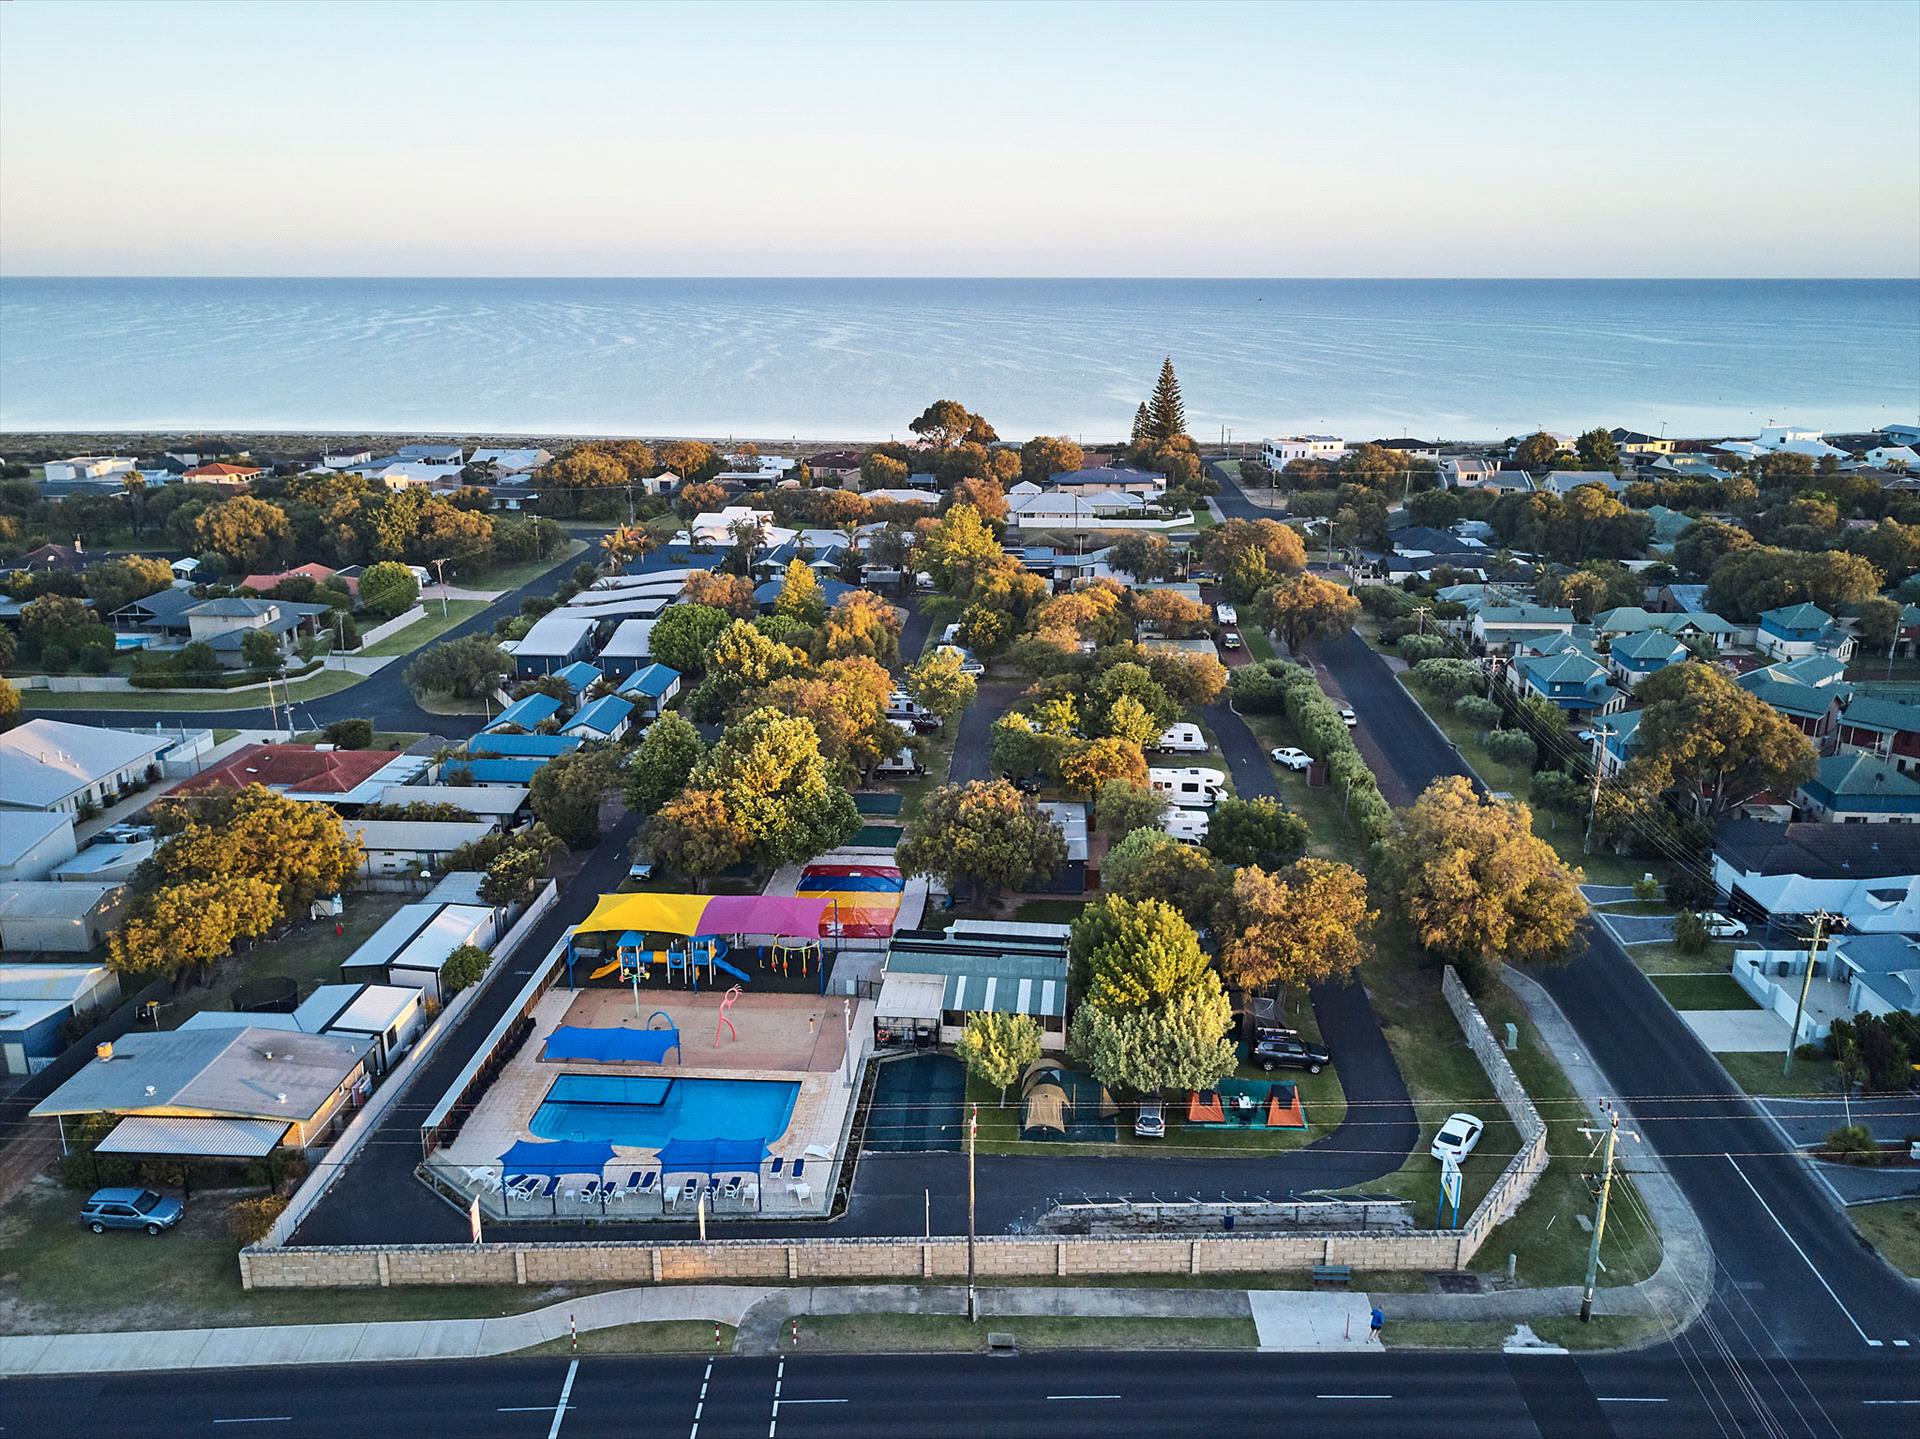 Aerial photo of BIG4 Breeze Holiday Park, Busselton.